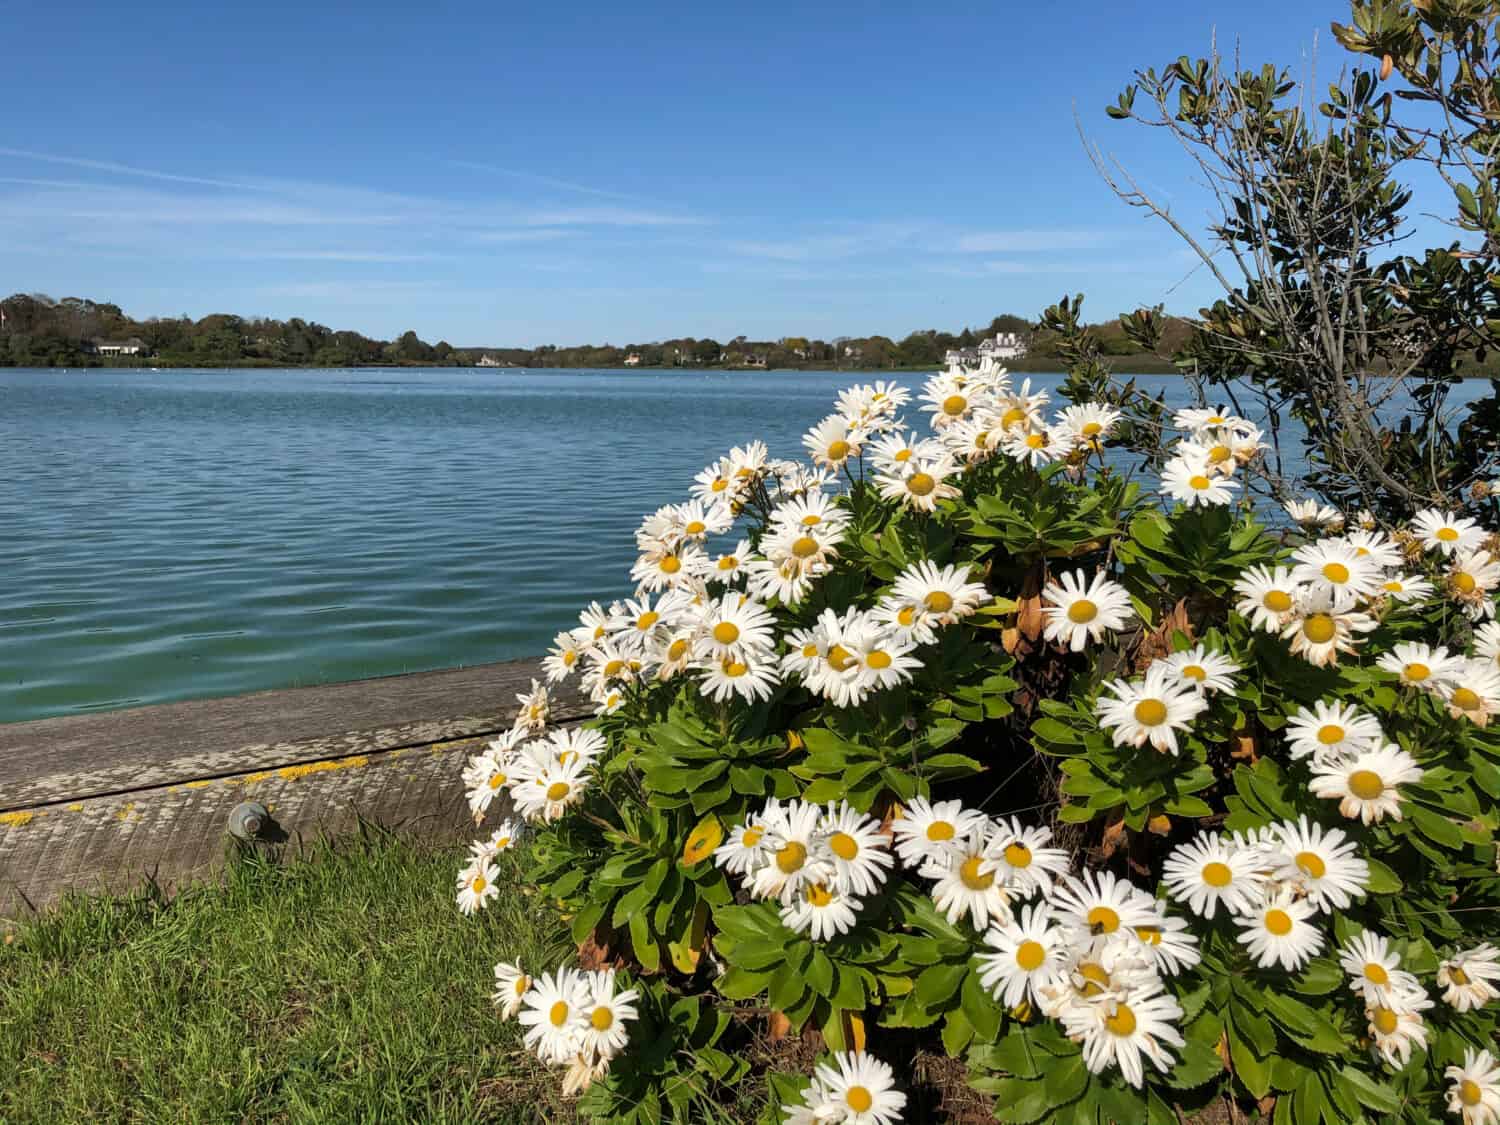 Montauk daisies in bloom on the shore of Agawam Lake in Southampton, Long Island, NY.